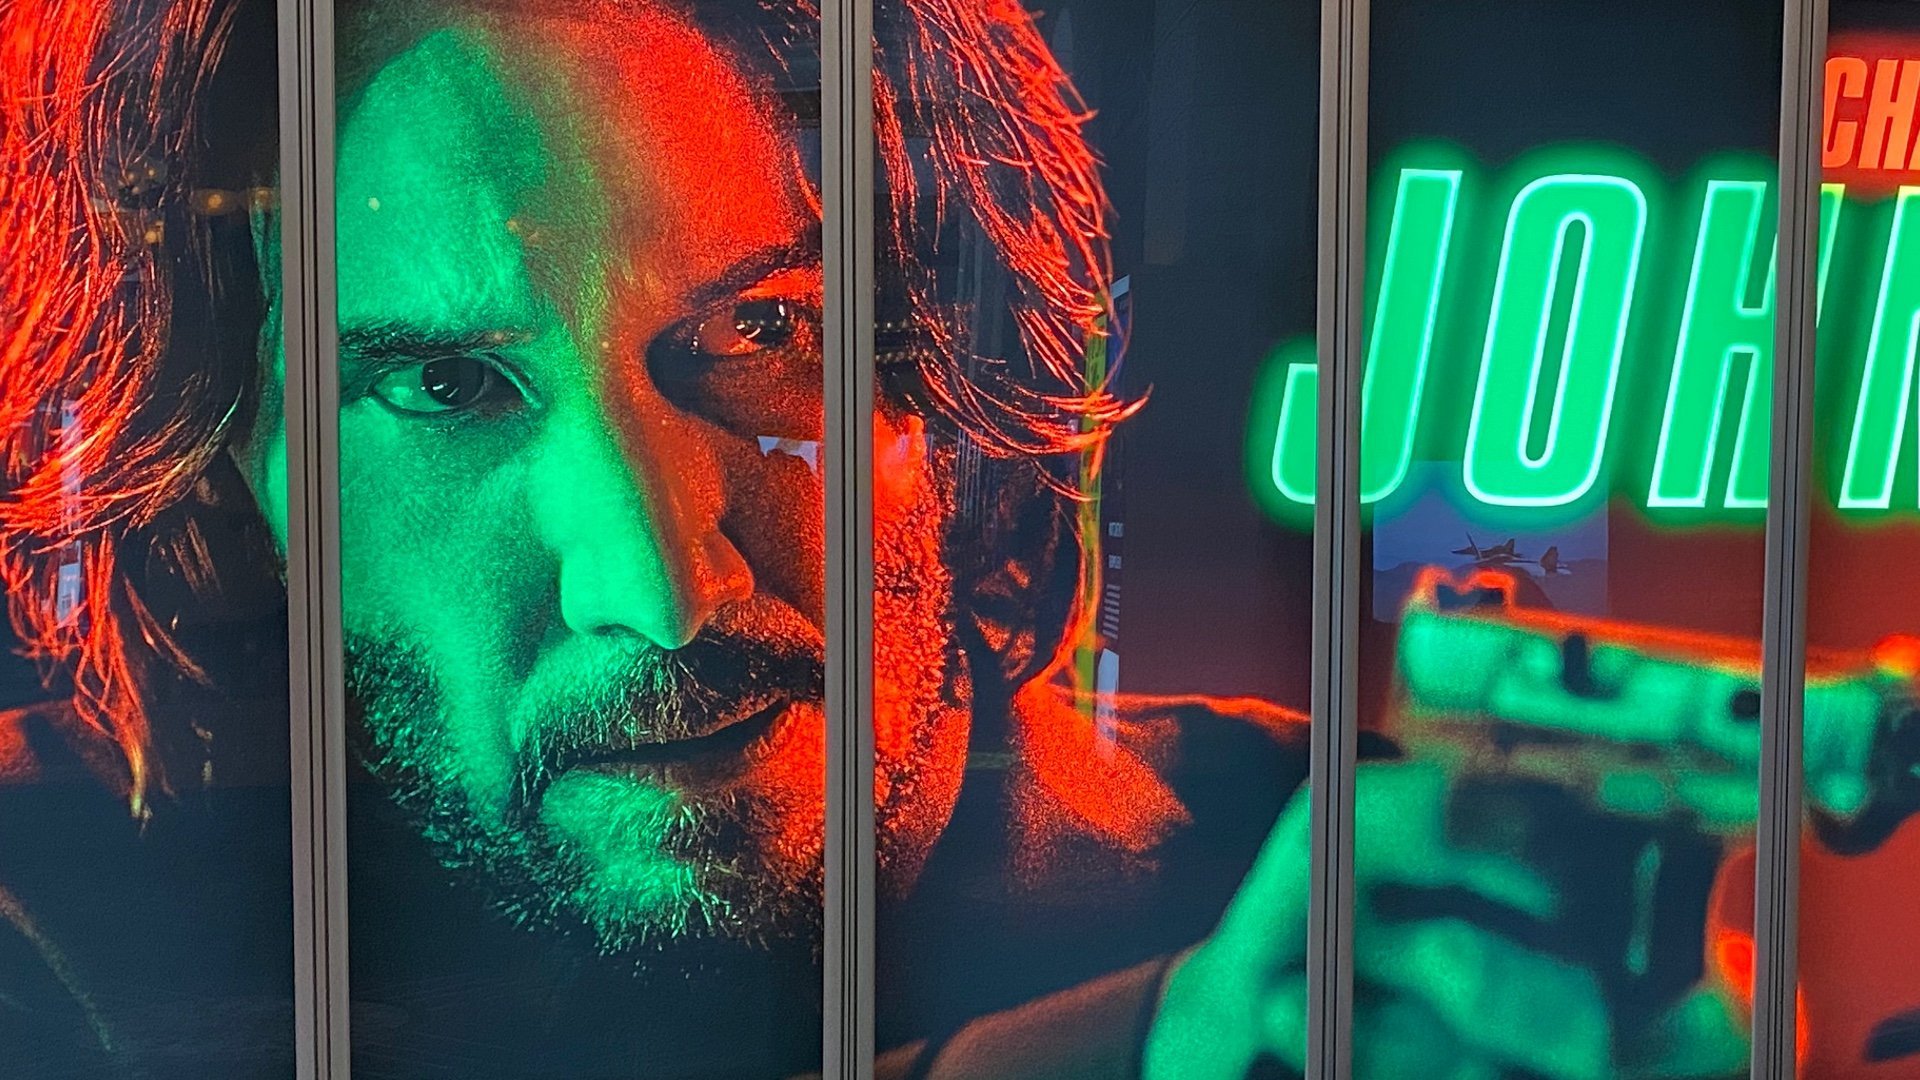 Posters Revealed For JOHN WICK 4, THE EXPENDABLES 4, Idris Elba's BEAST, and James Wan's M3GAN